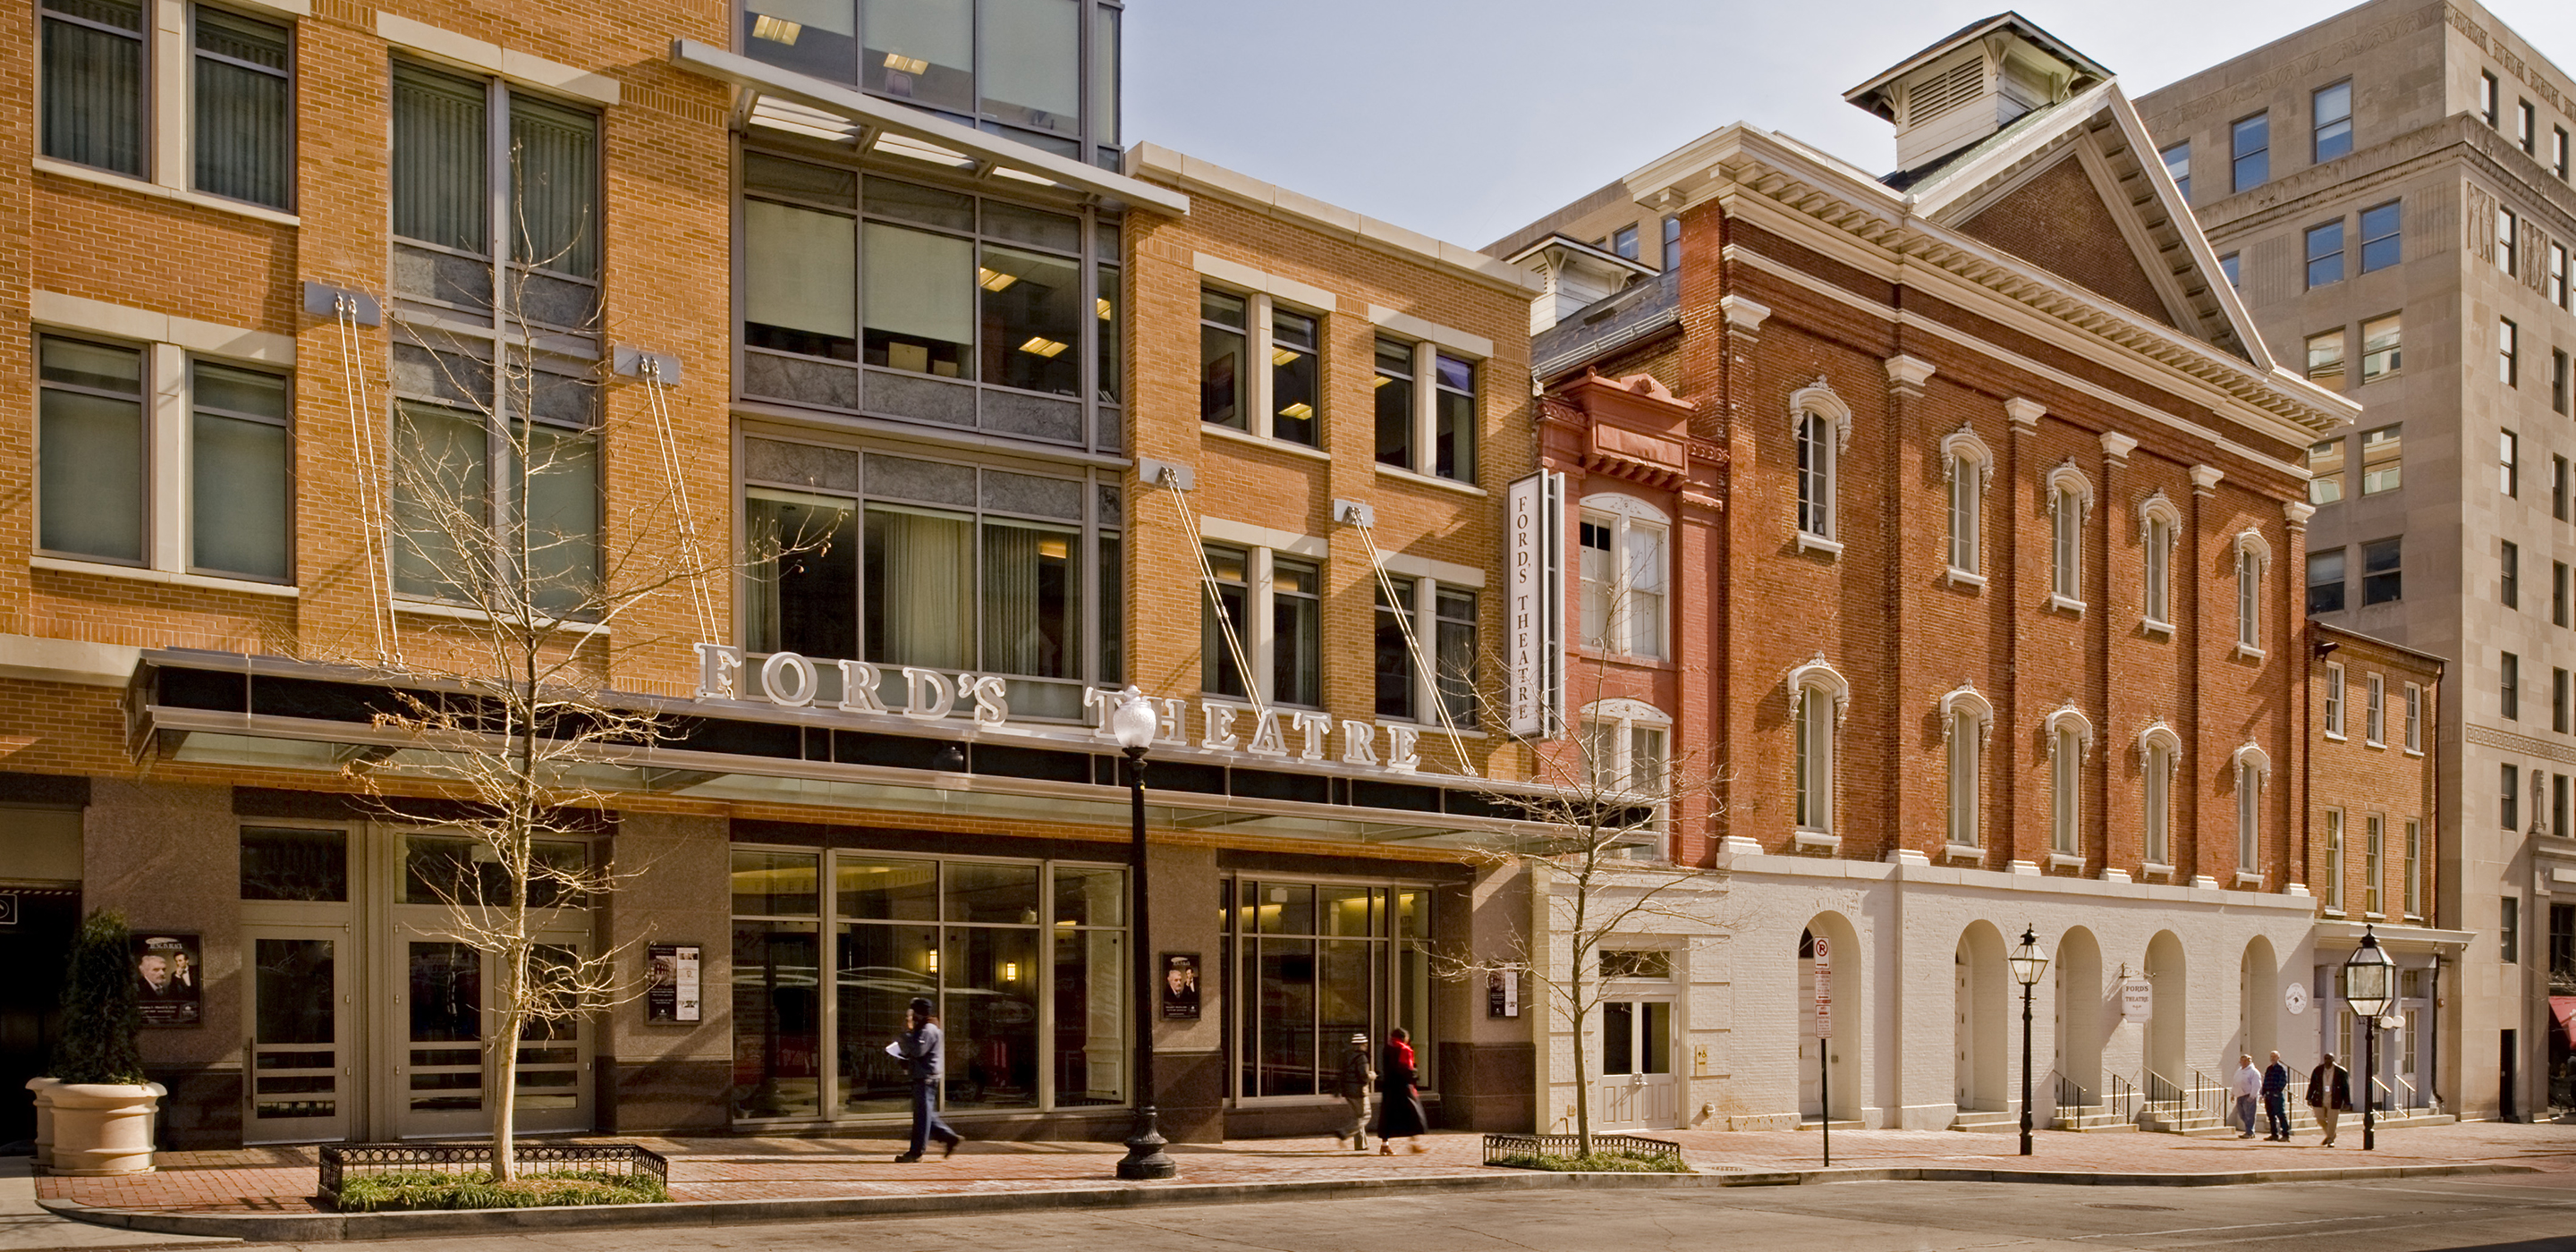 A street view of the lobby and the historic Ford’s Theatre. The lobby, on the left, is a modern building with large glass windows and a large sign reading “Ford’s Theatre.” The historic theatre, to the right, is a three-story brick building with a series of arched entrances.